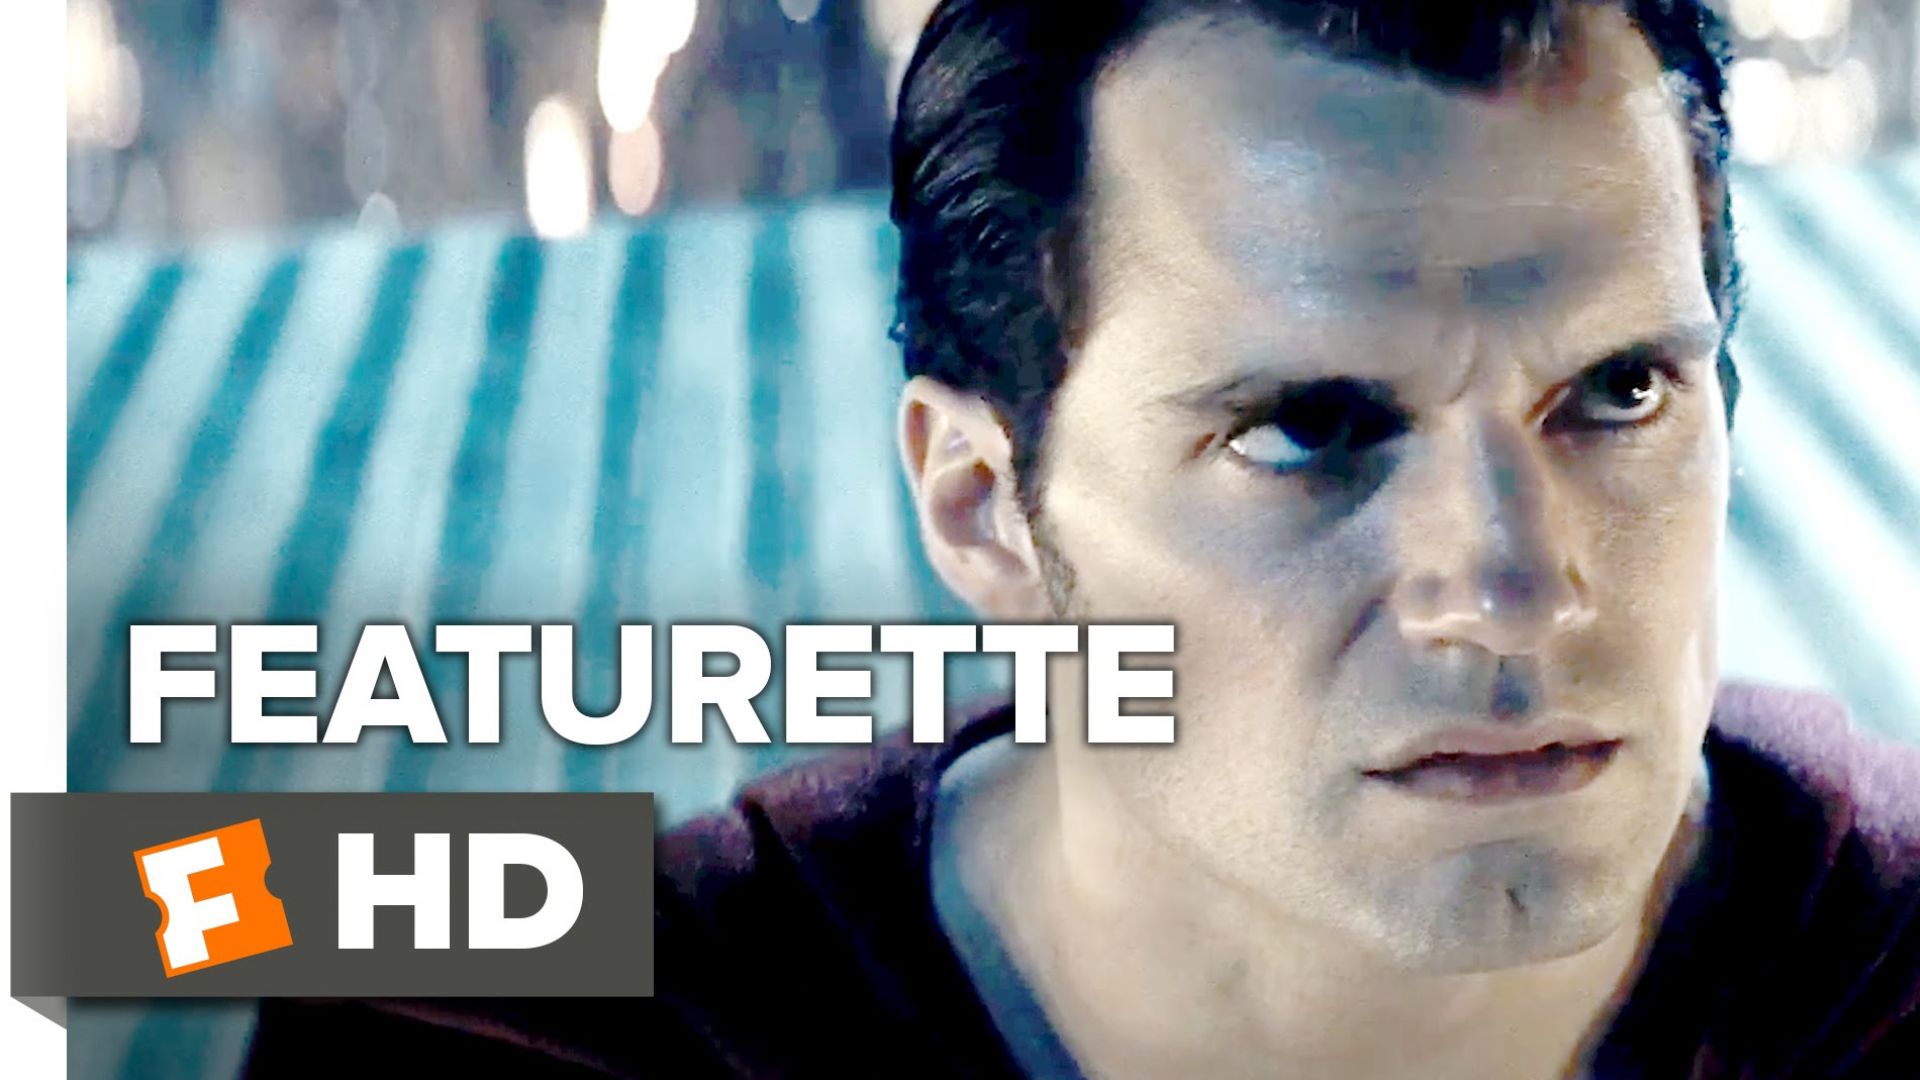 Get Behind the Story in new Batman v Superman Featurette